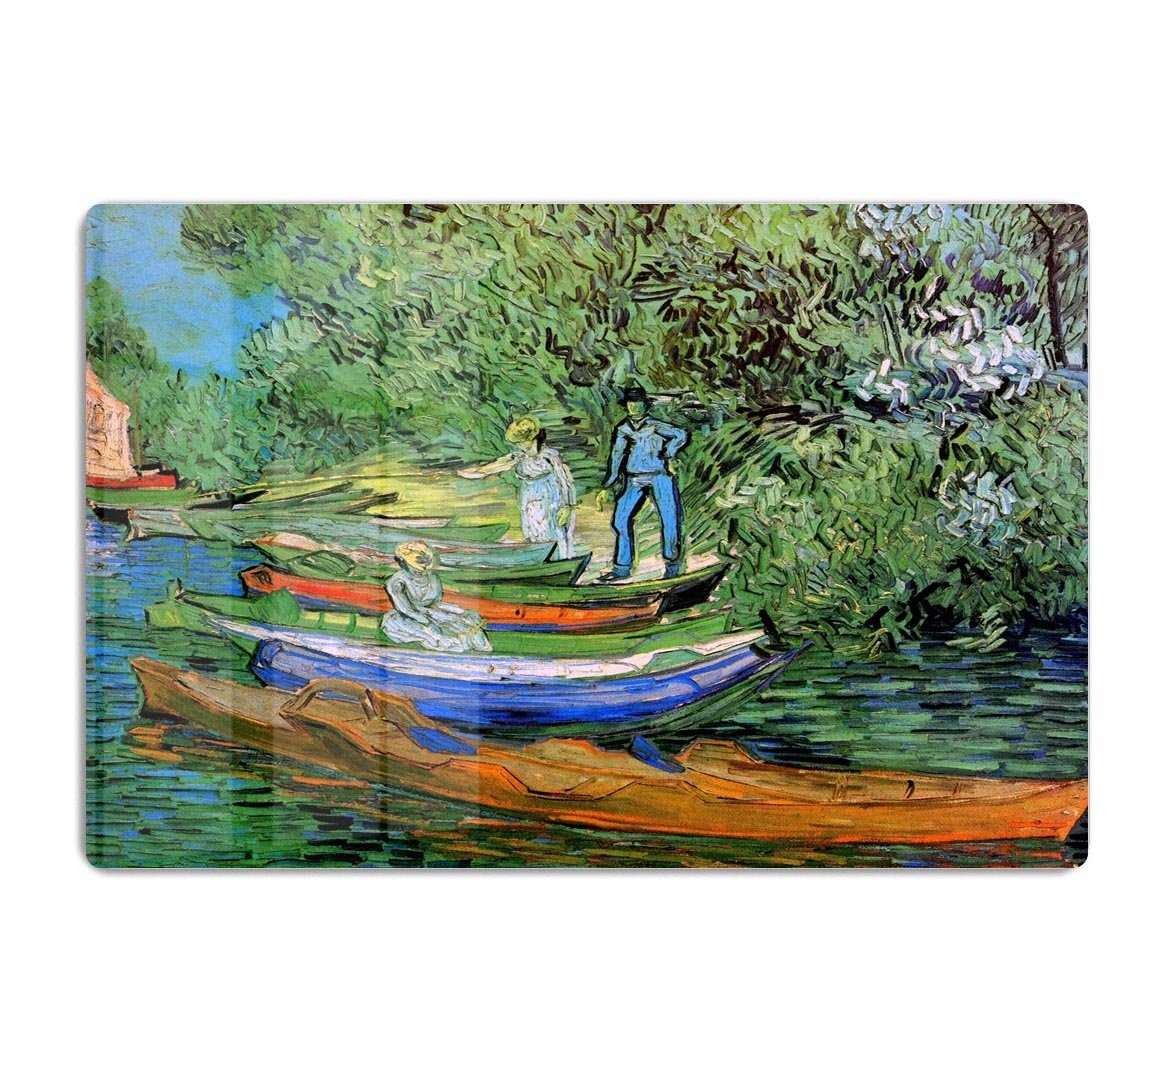 Bank of the Oise at Auvers by Van Gogh HD Metal Print